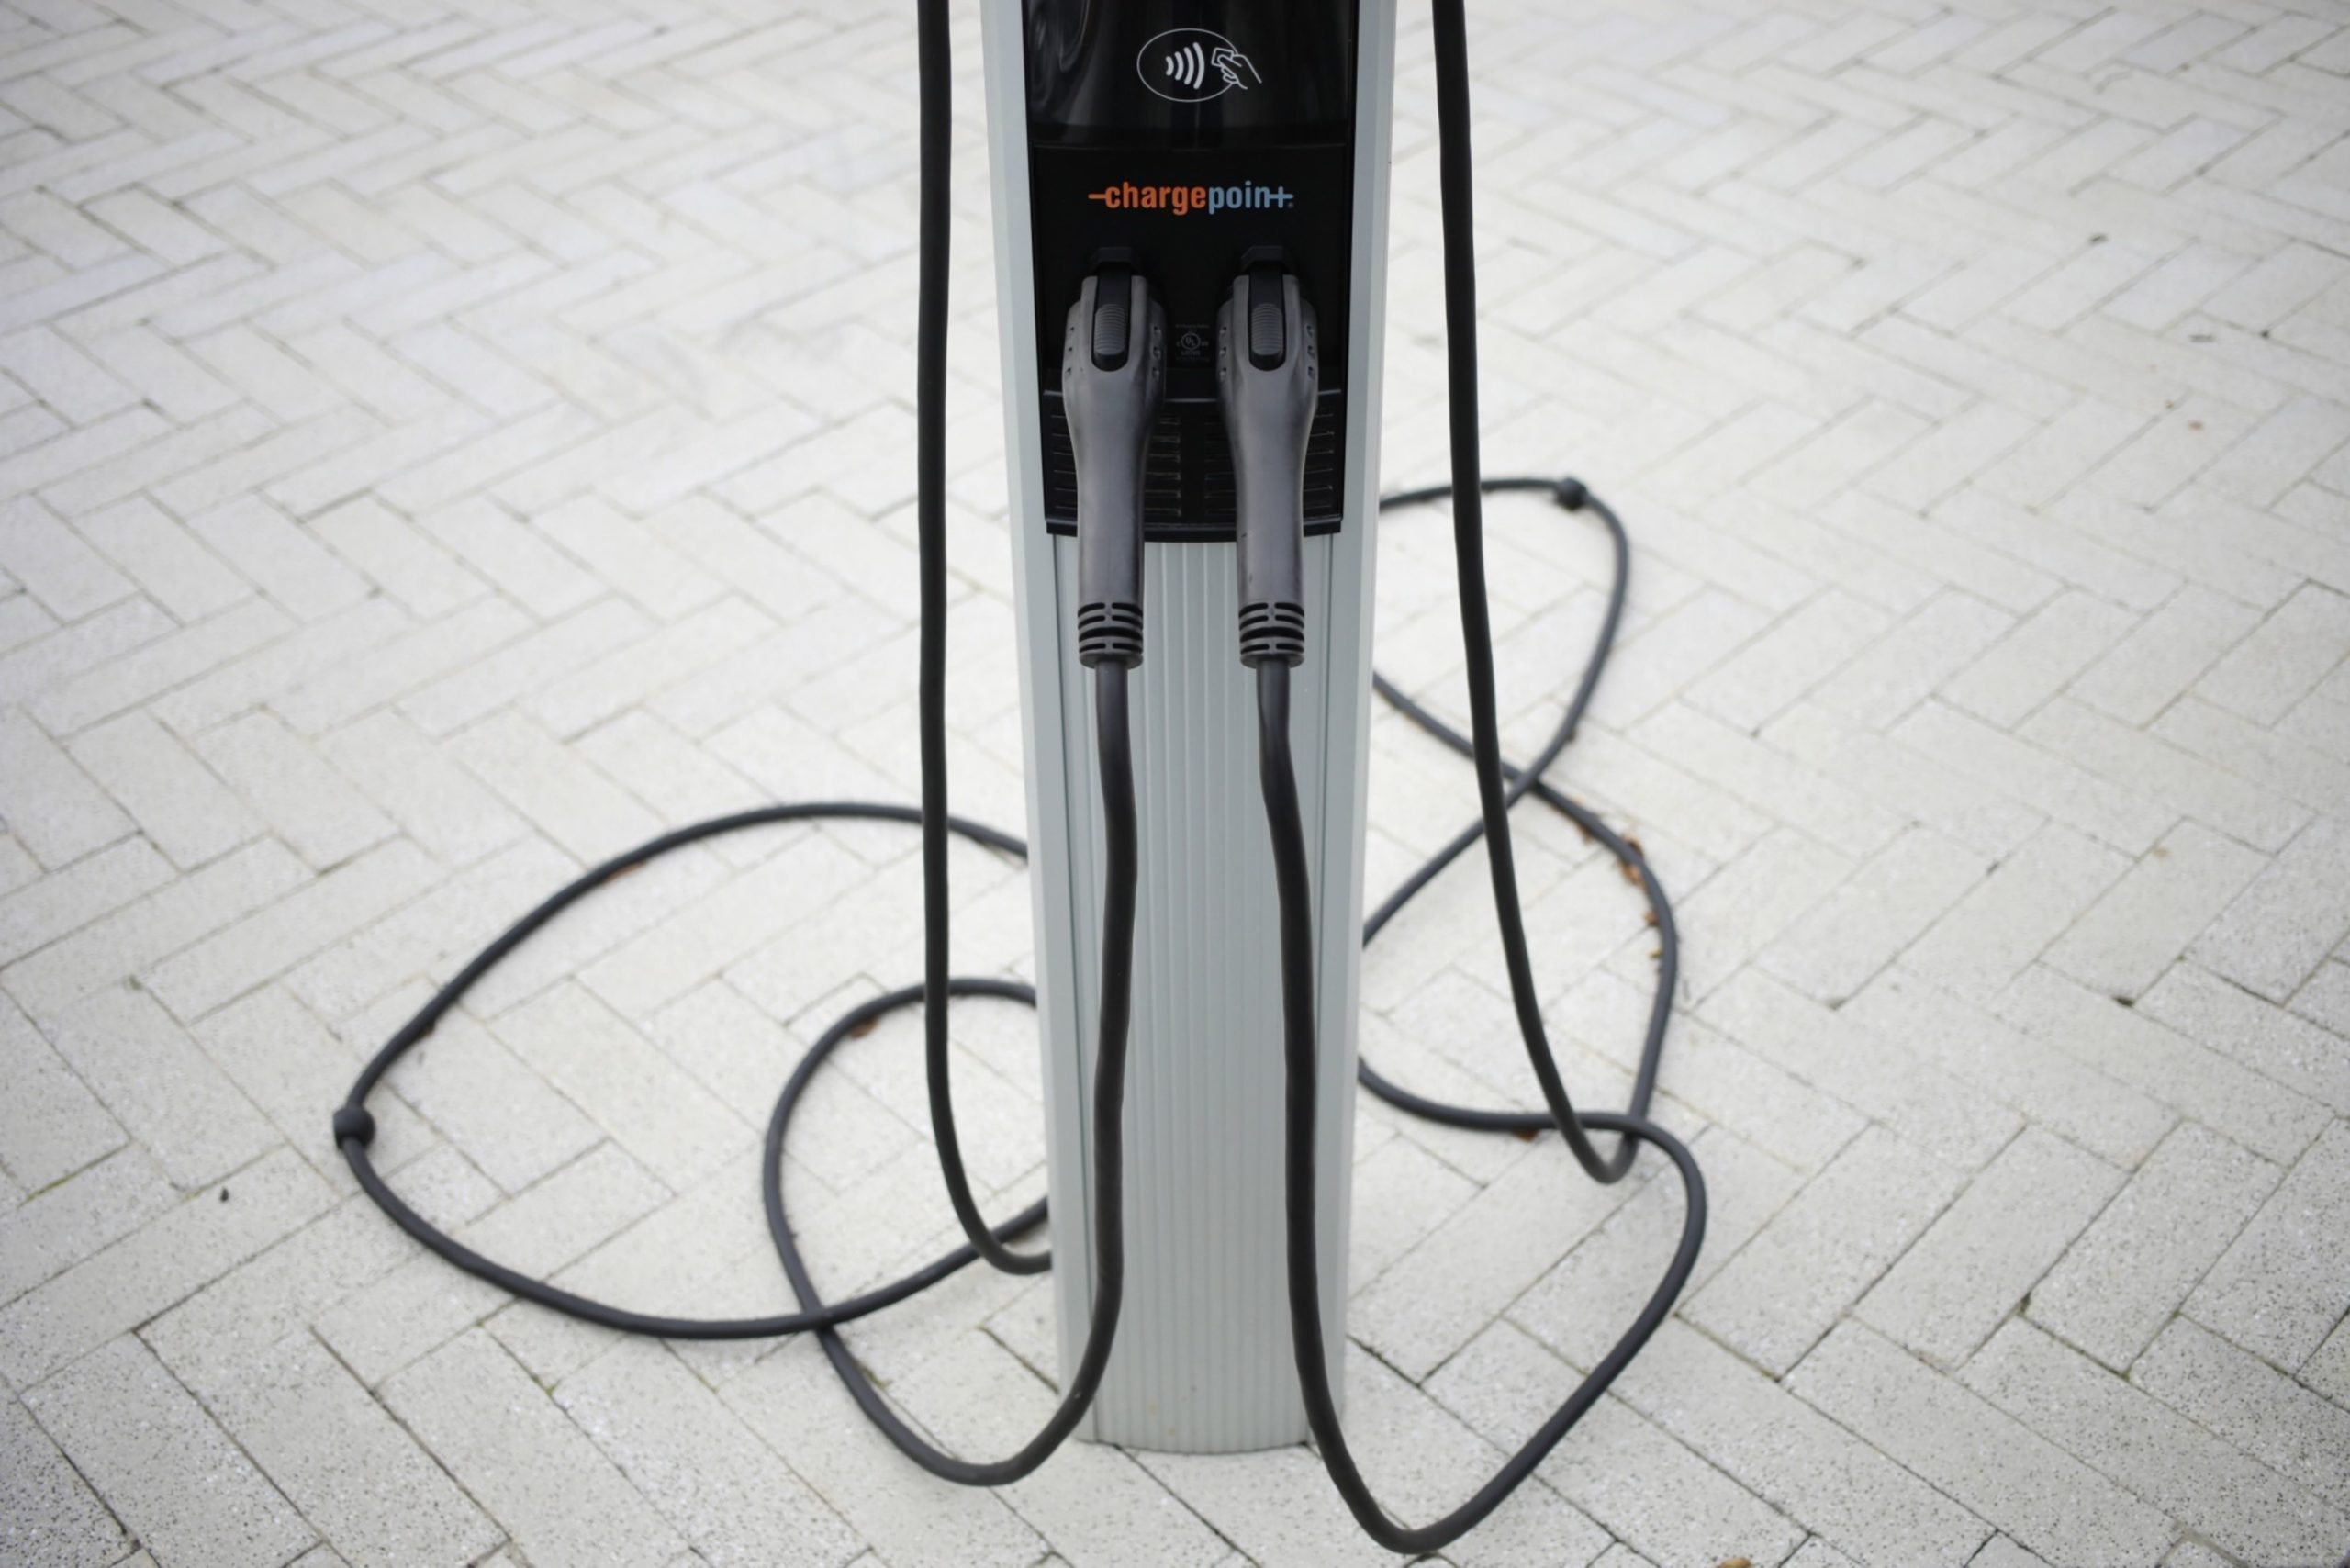 A ChargePoint electric vehicle (EV) charging station at the Mercedes-Benz of Louisville dealership in Louisville, Kentucky, U.S., on Tuesday, Dec. 7, 2021. U.S. car sales inched higher and inventories grew in October, a sign that some of the worst of the shortages hampering auto production might be fading, but auto makers continued to struggle to replenish dealer lots and supply is likely to remain tight through next year, according to MarketWatch.